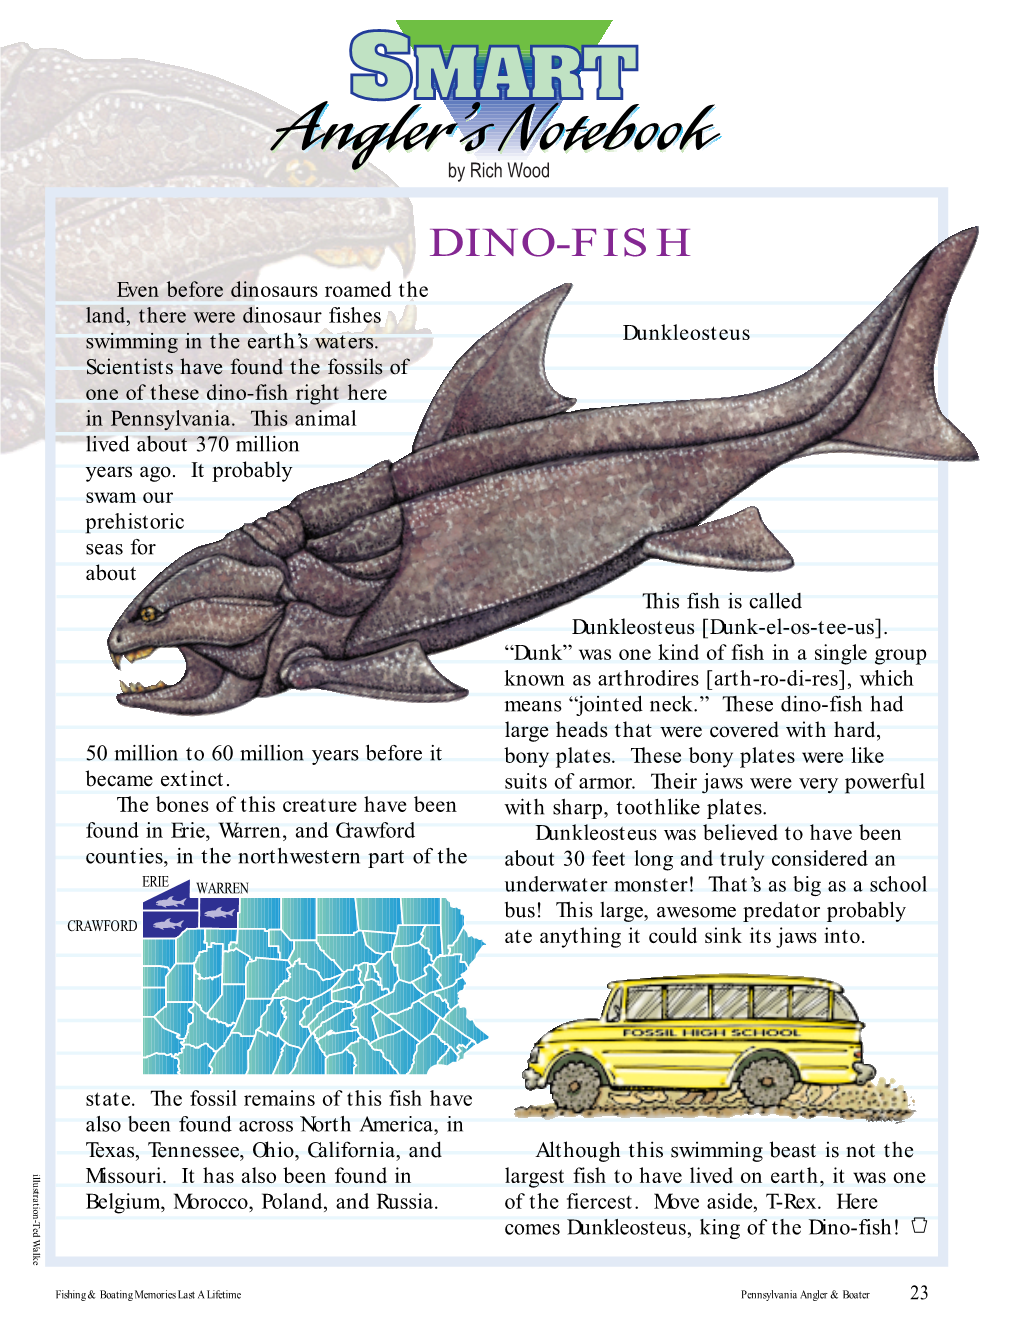 DINO-FISH Even Before Dinosaurs Roamed the Land, There Were Dinosaur Fishes Swimming in the Earth’S Waters